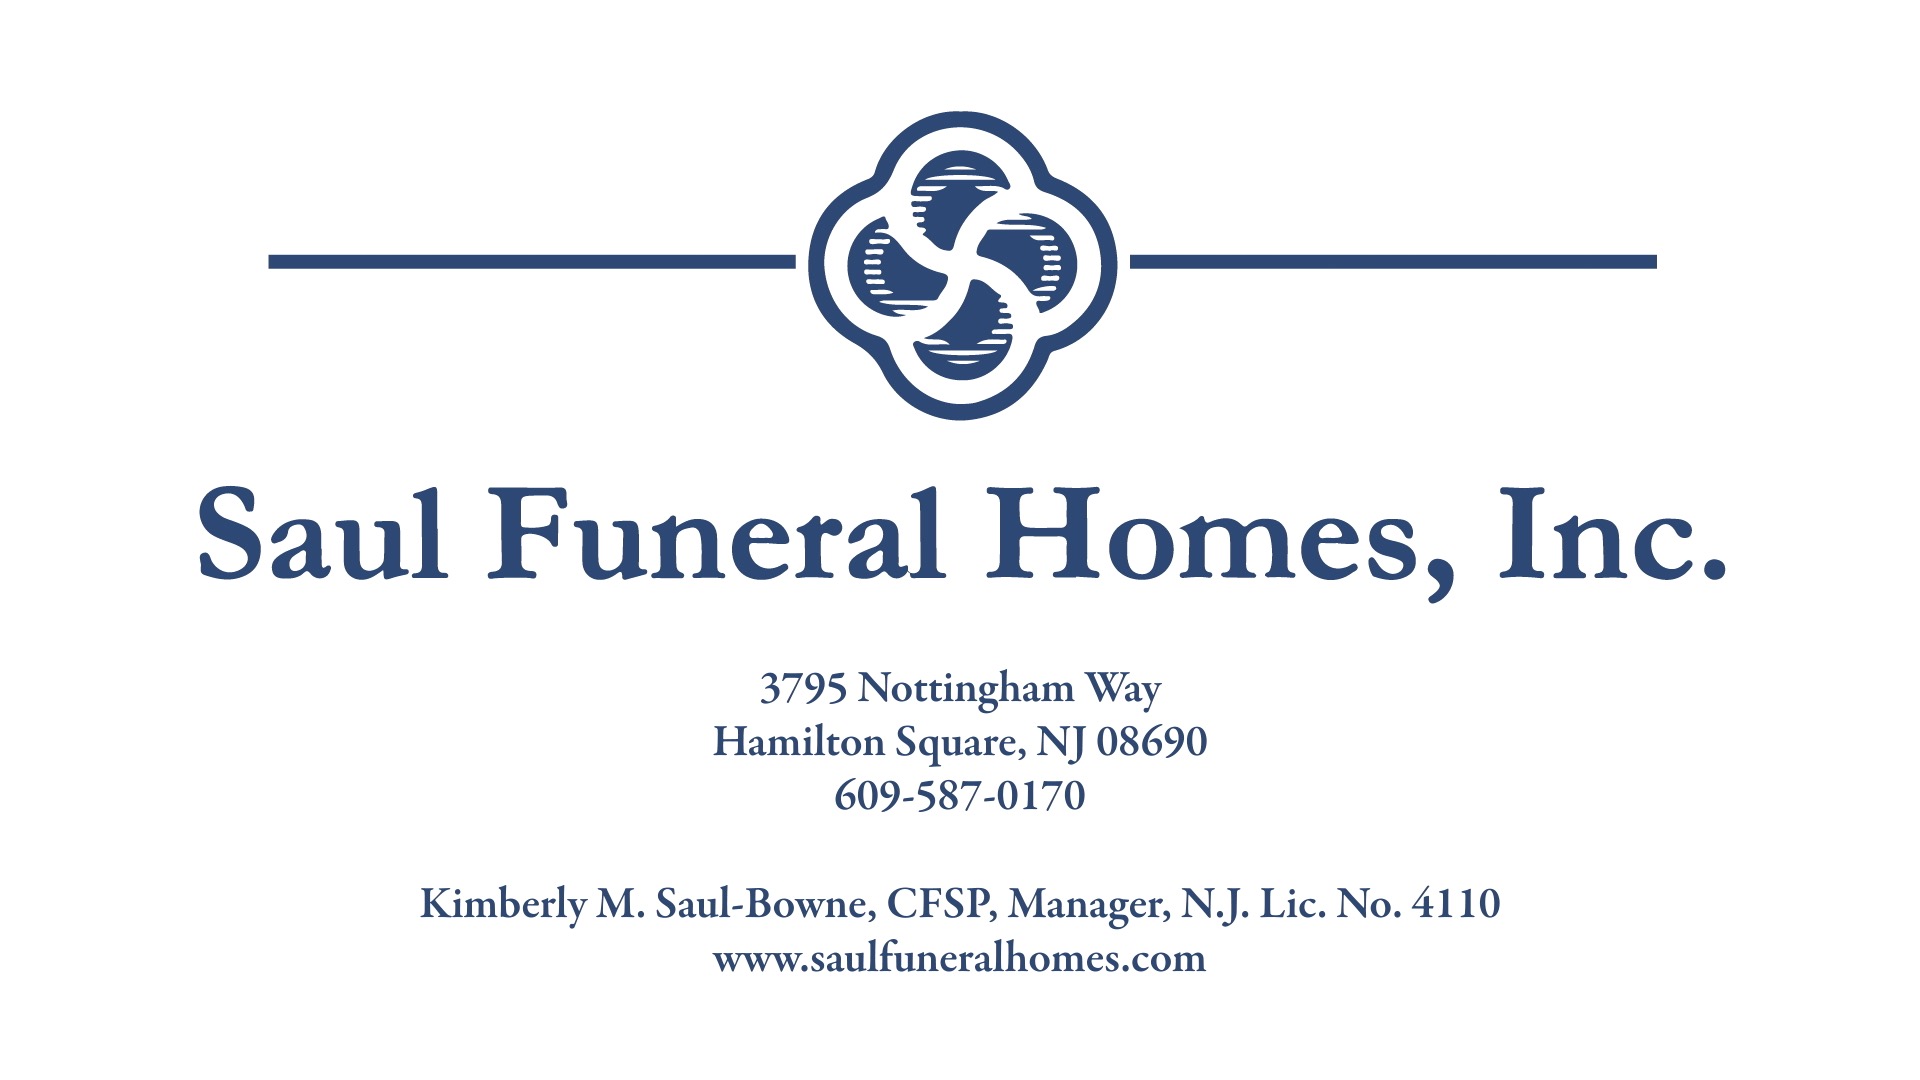 Hamilton, NJ Funeral Home and Cremations - Saul Funeral Homes